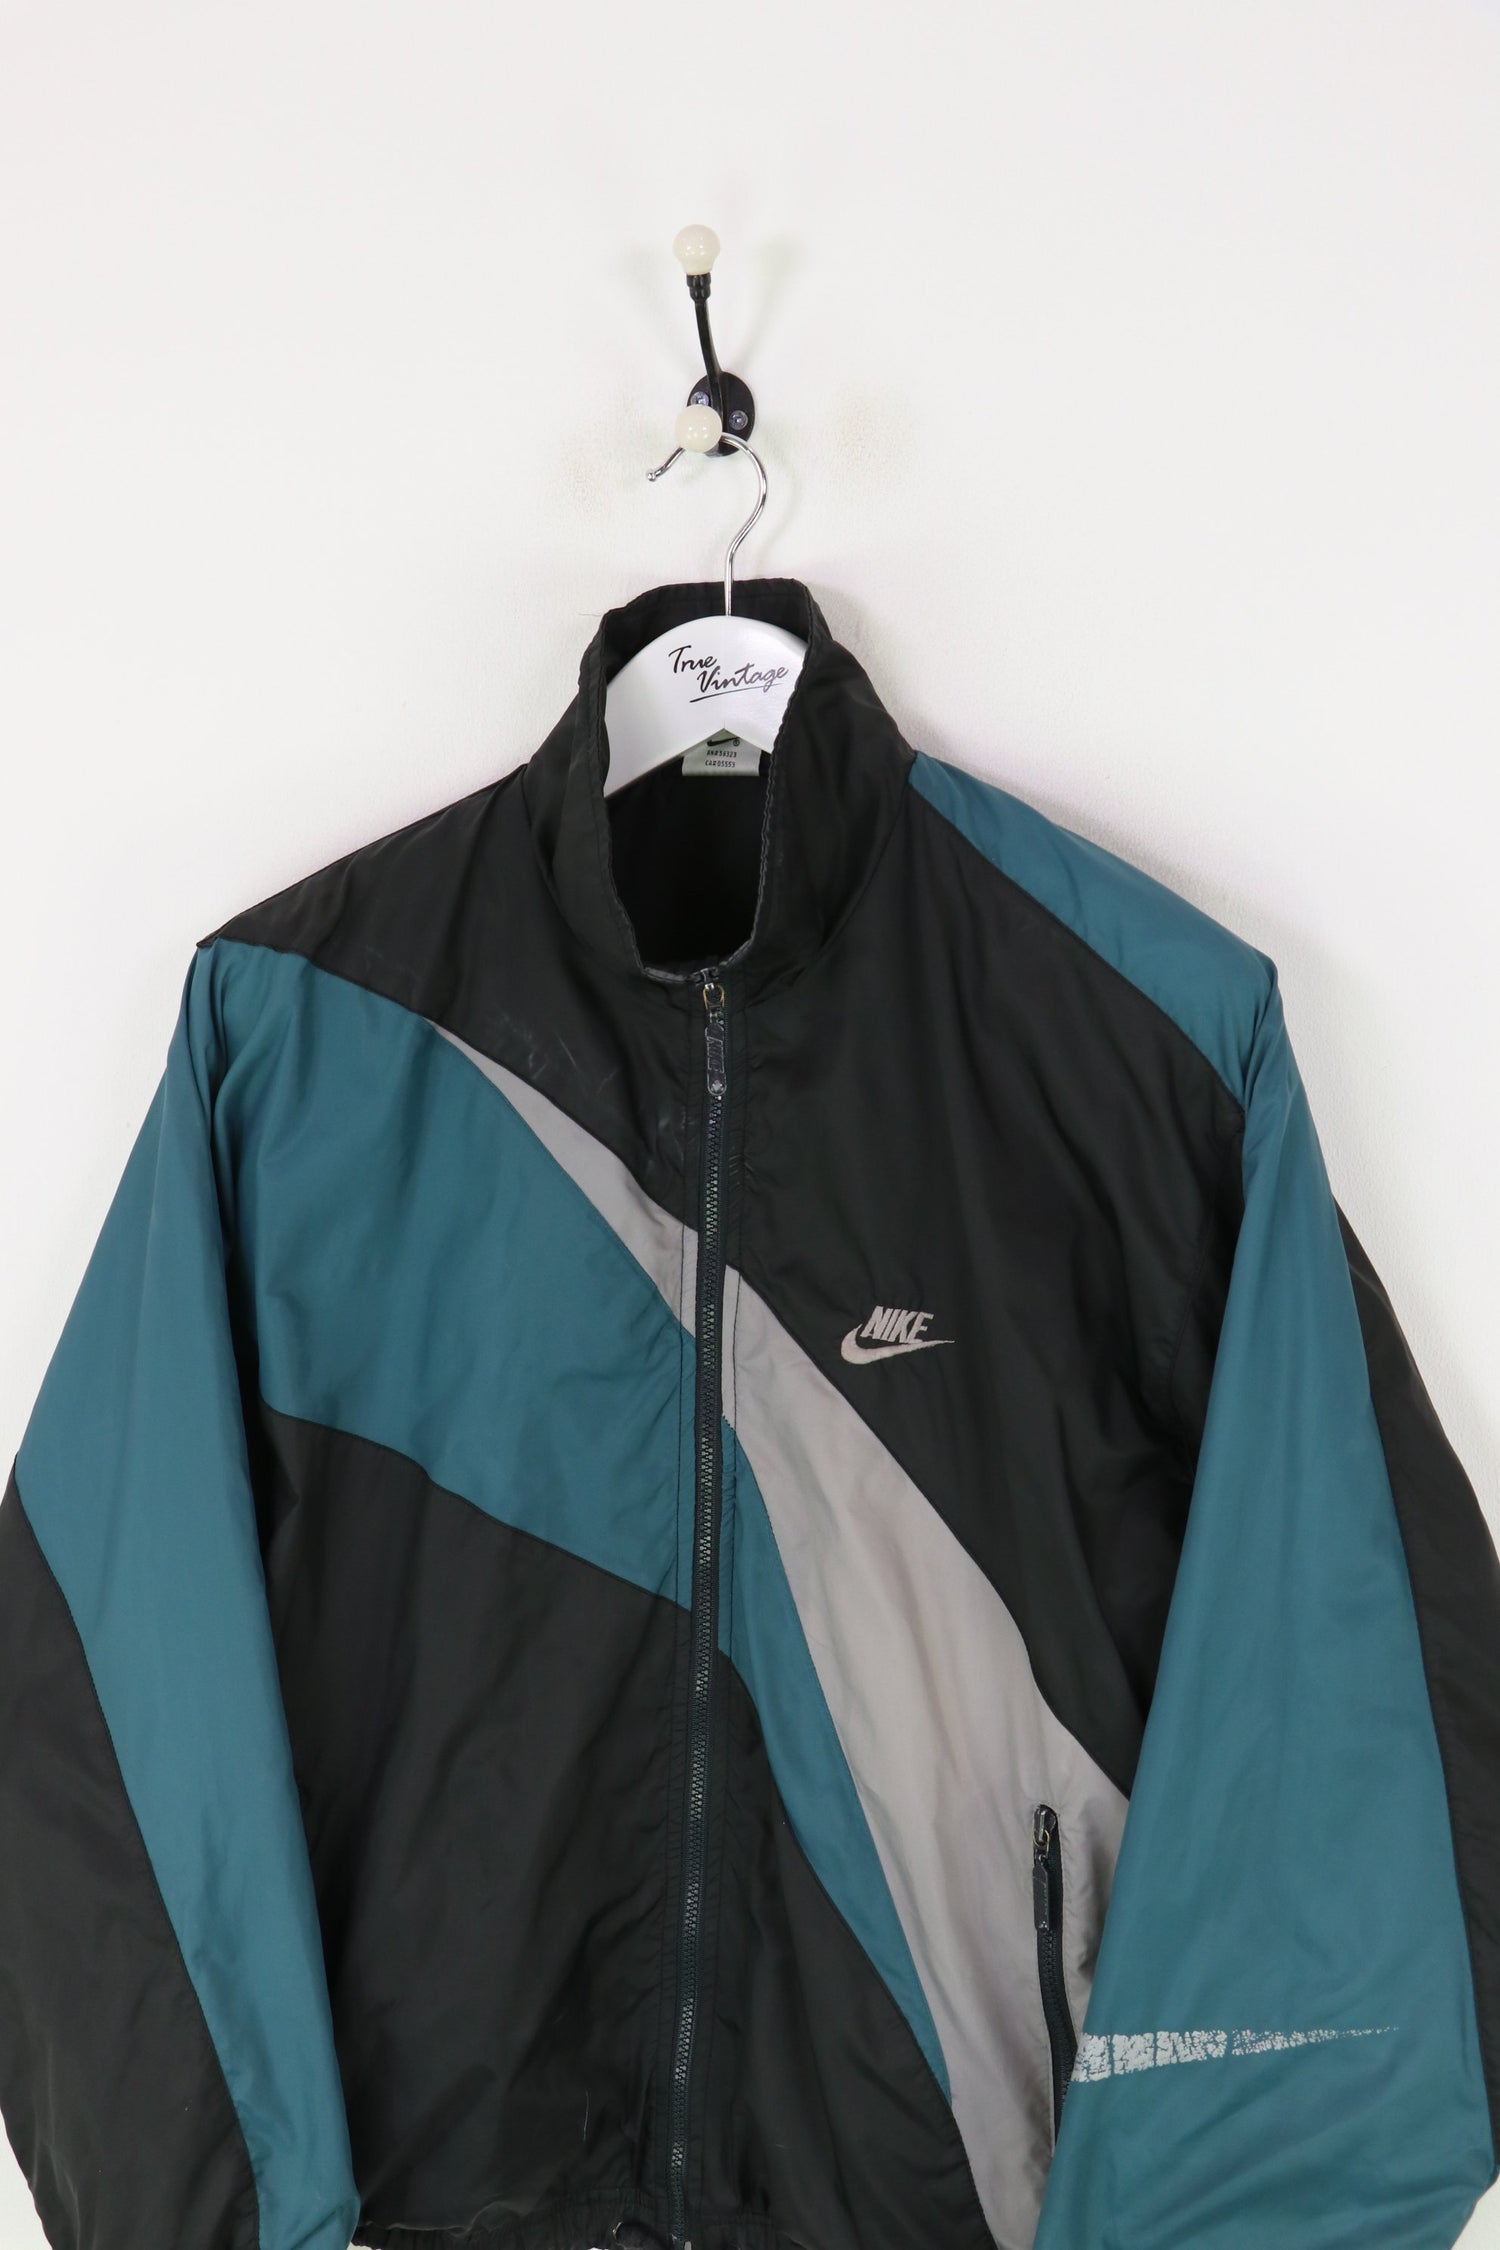 Nike Shell Suit Jacket Black/Green Small